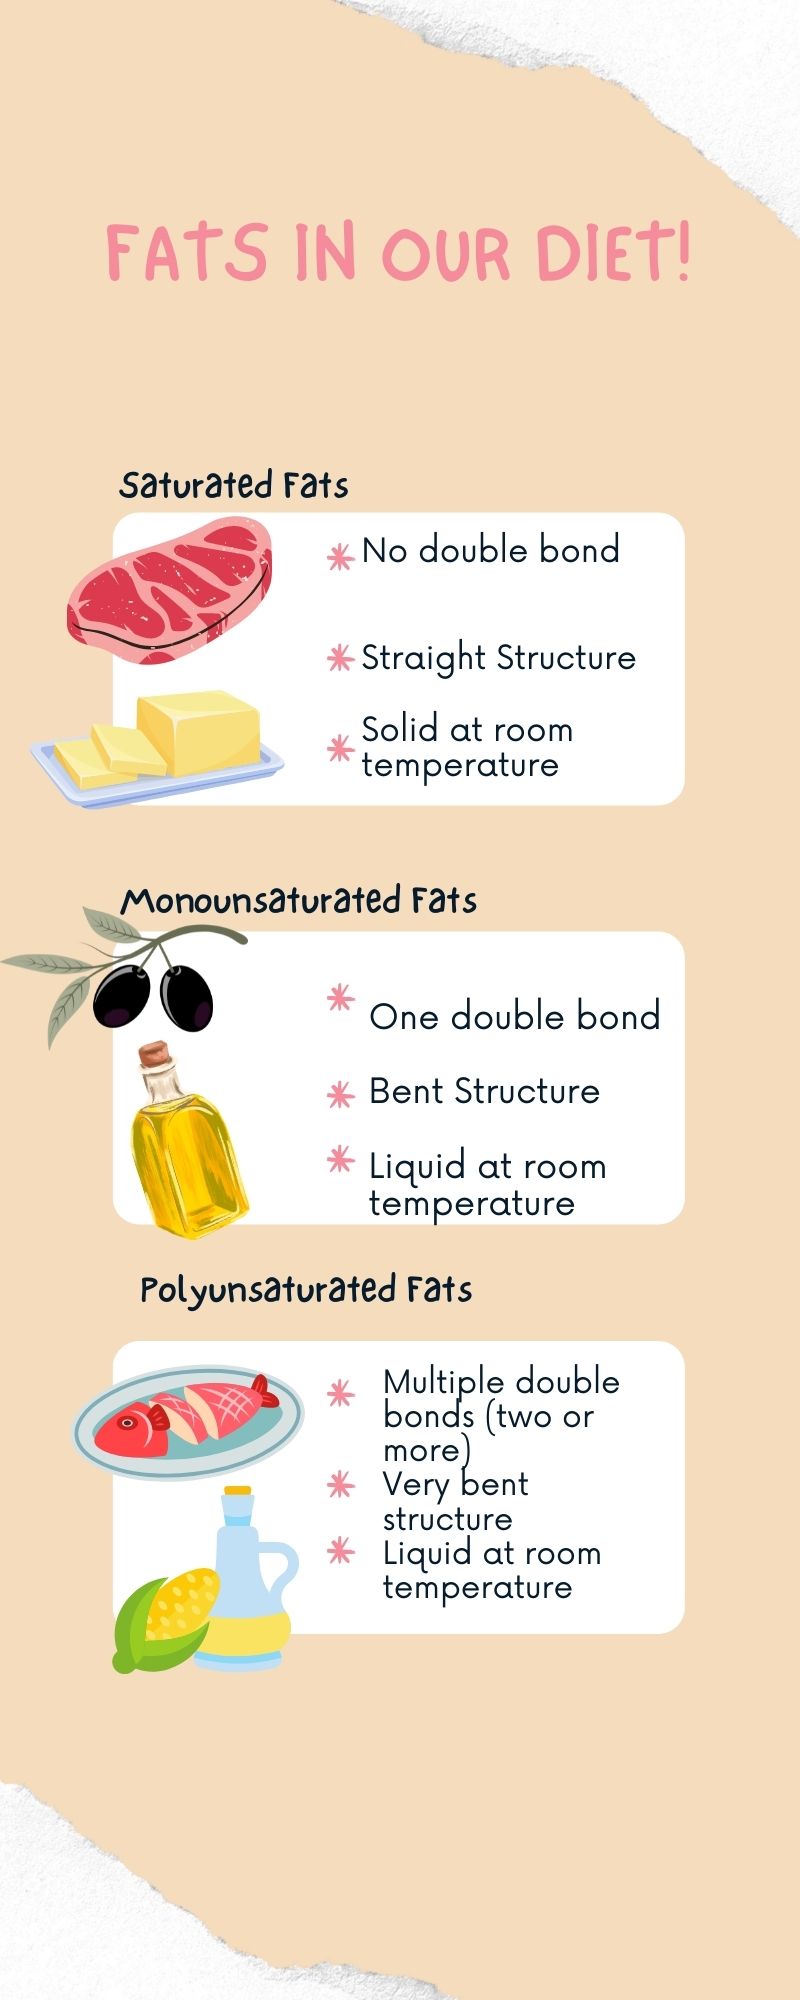 Infographic summarizing differences between saturated, monounsaturated, and polyunsaturated fats.